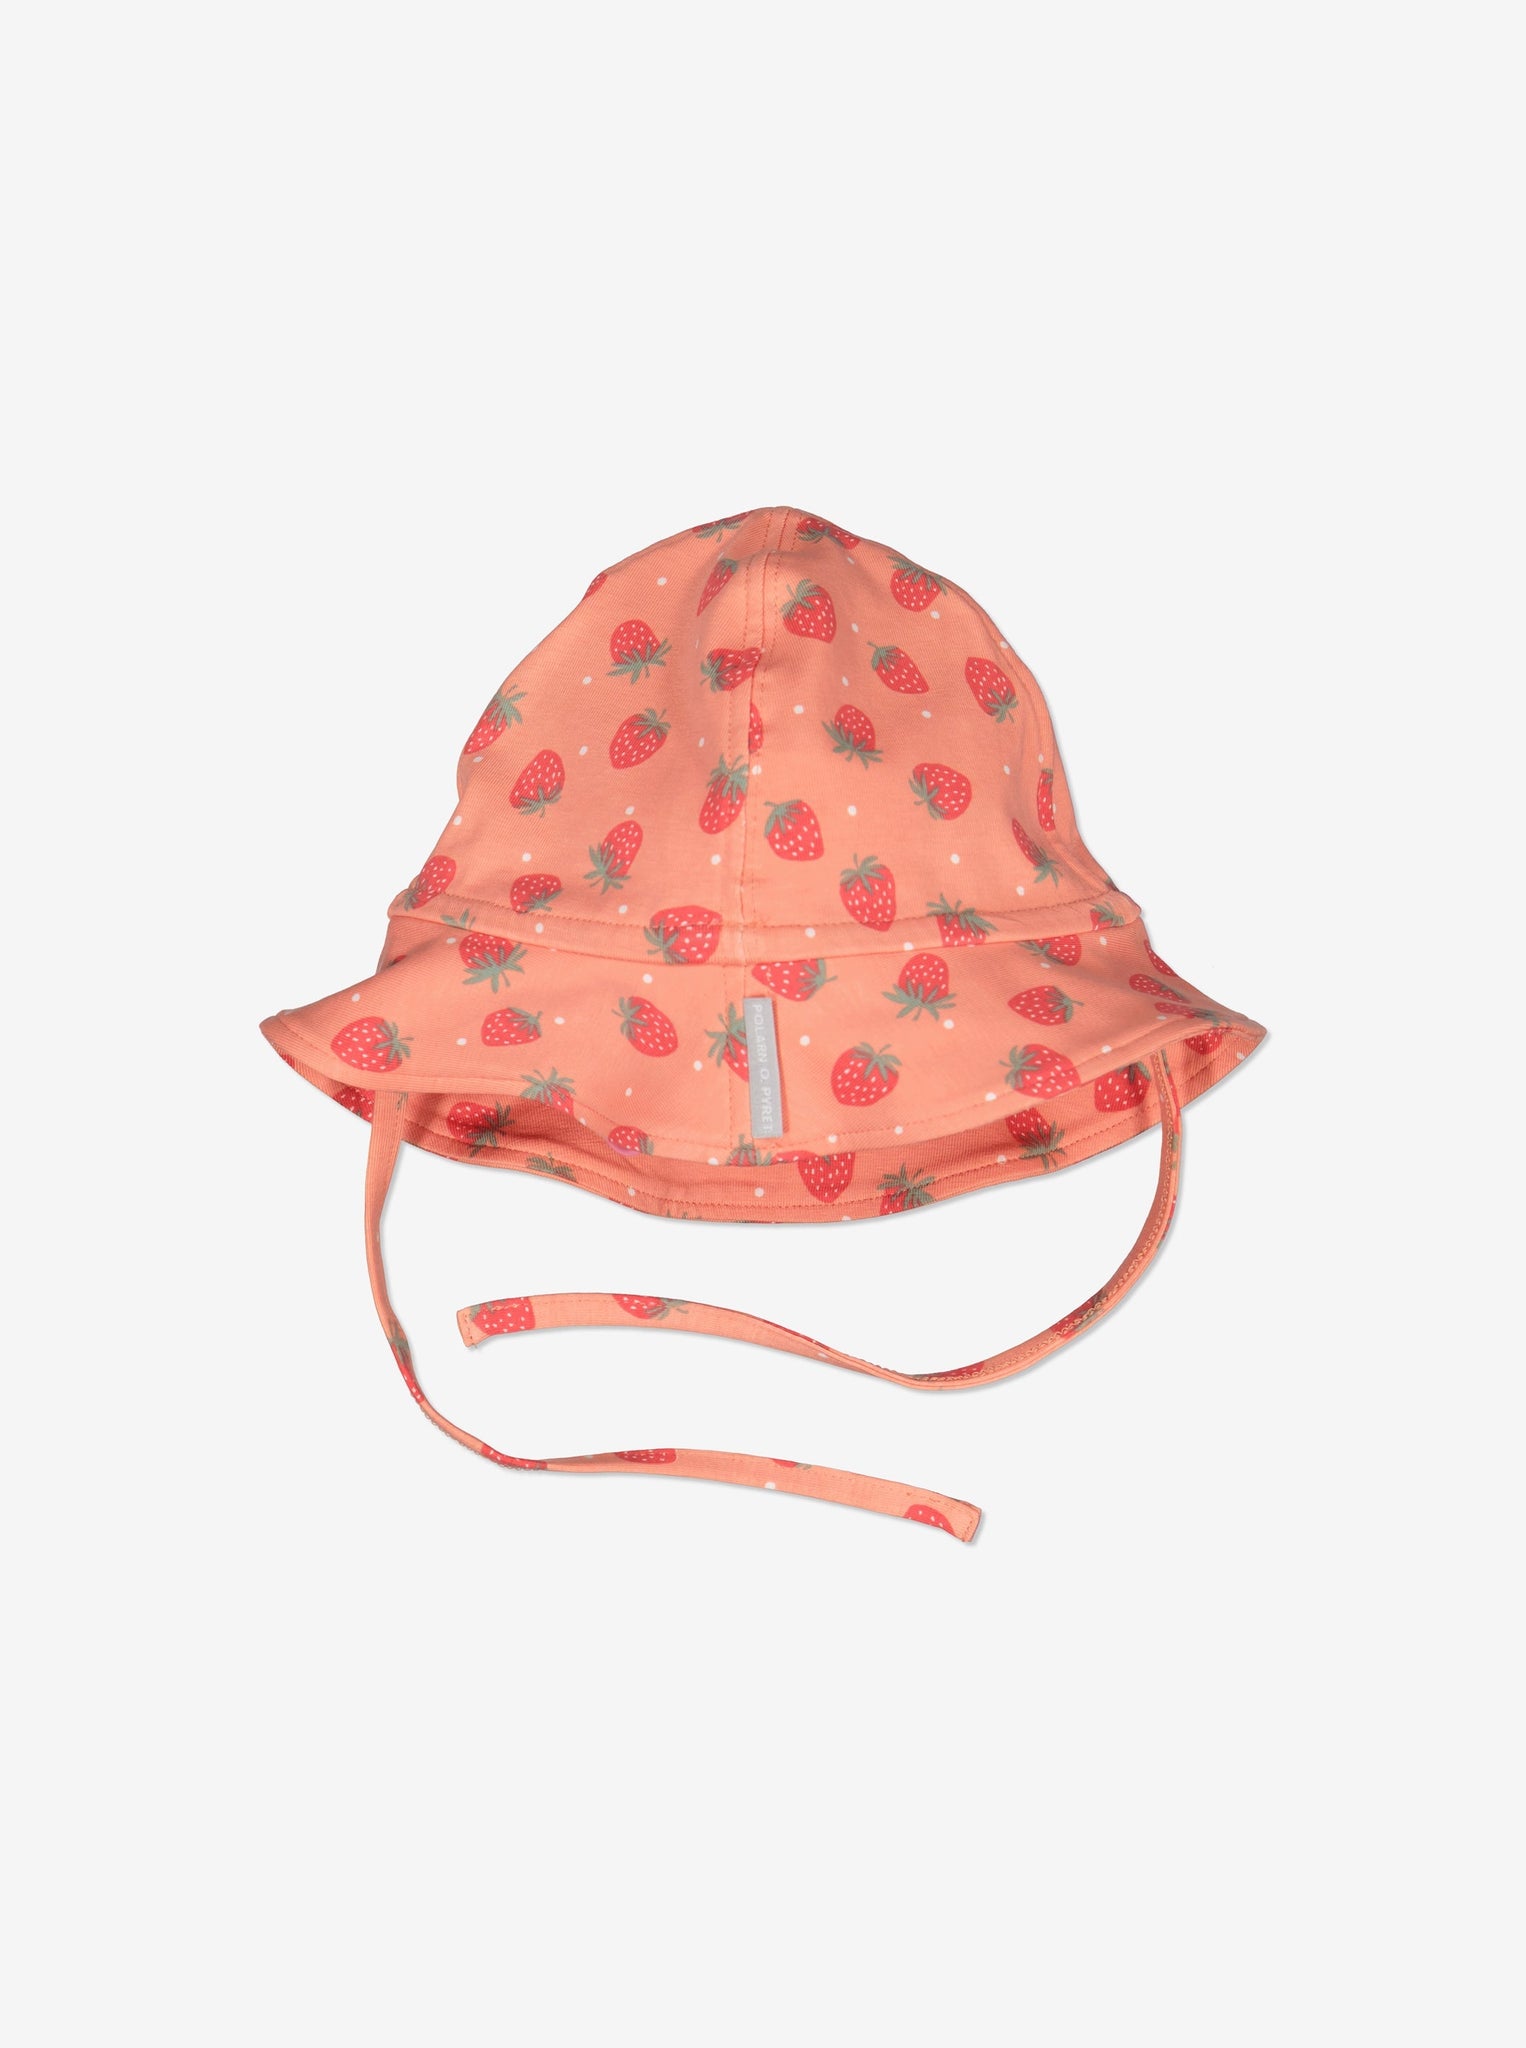 Red Strawberry Print Baby Sun Hat from Polarn O. Pyret Kidswear. Made from ethically sourced materials.